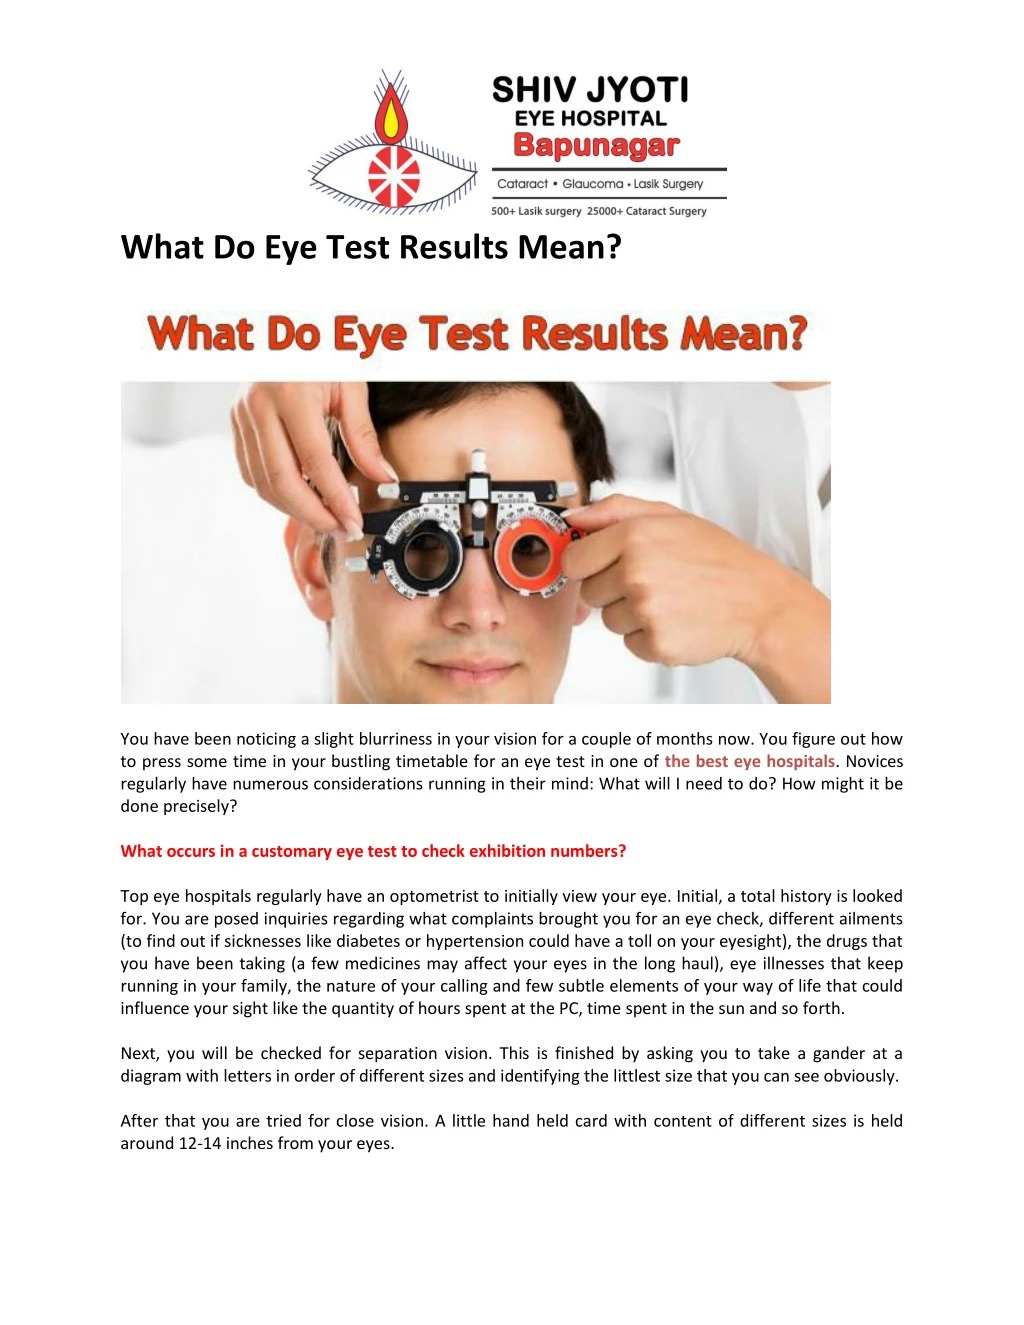 what do eye test results mean